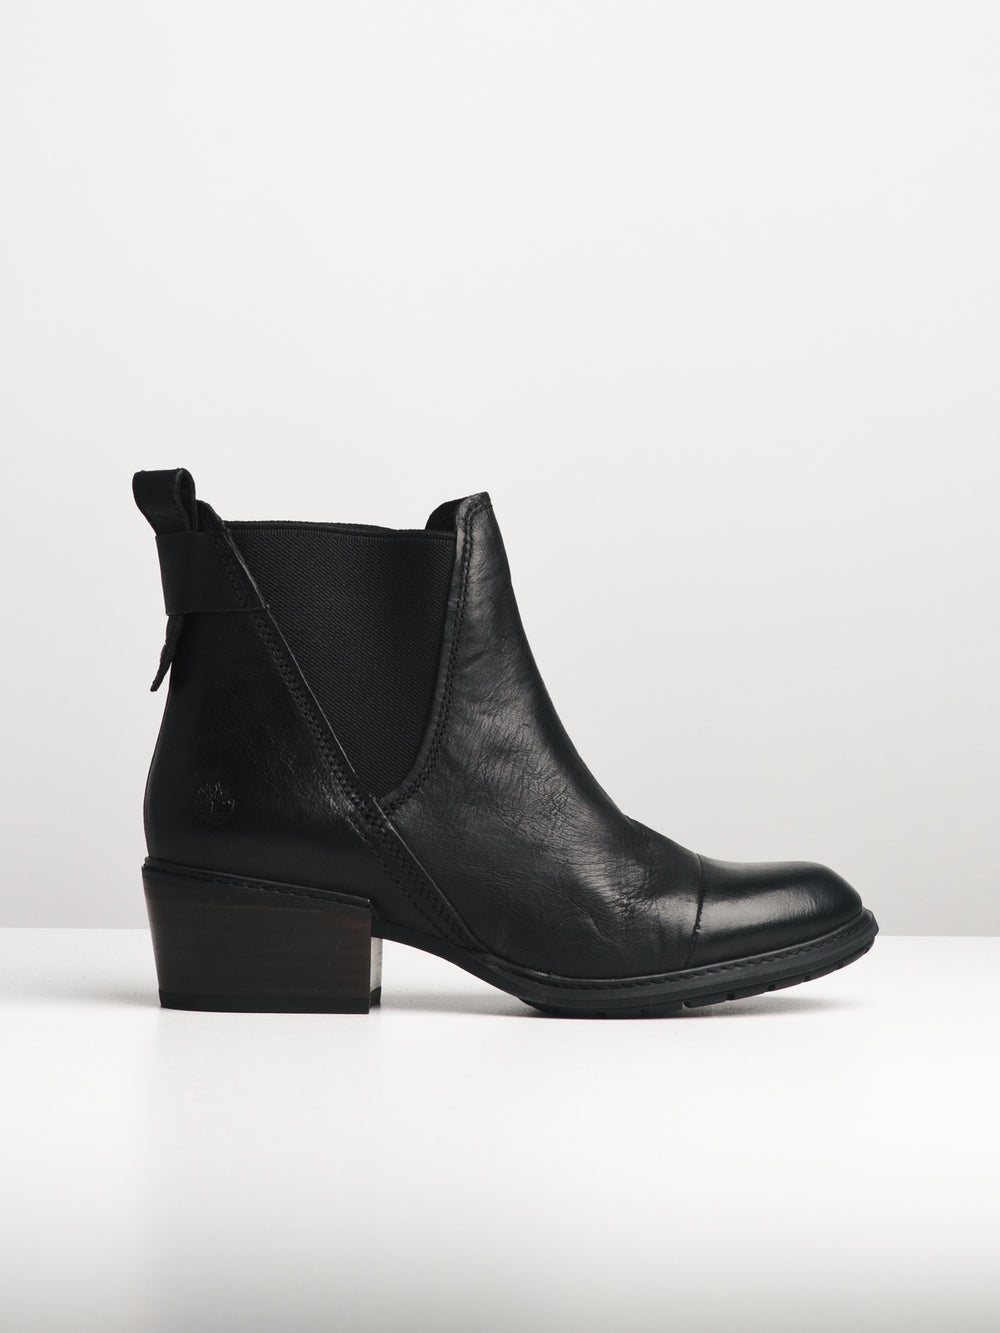 WOMENS SUTHERLIN BAY CHELSEA - BLACK - CLEARANCE